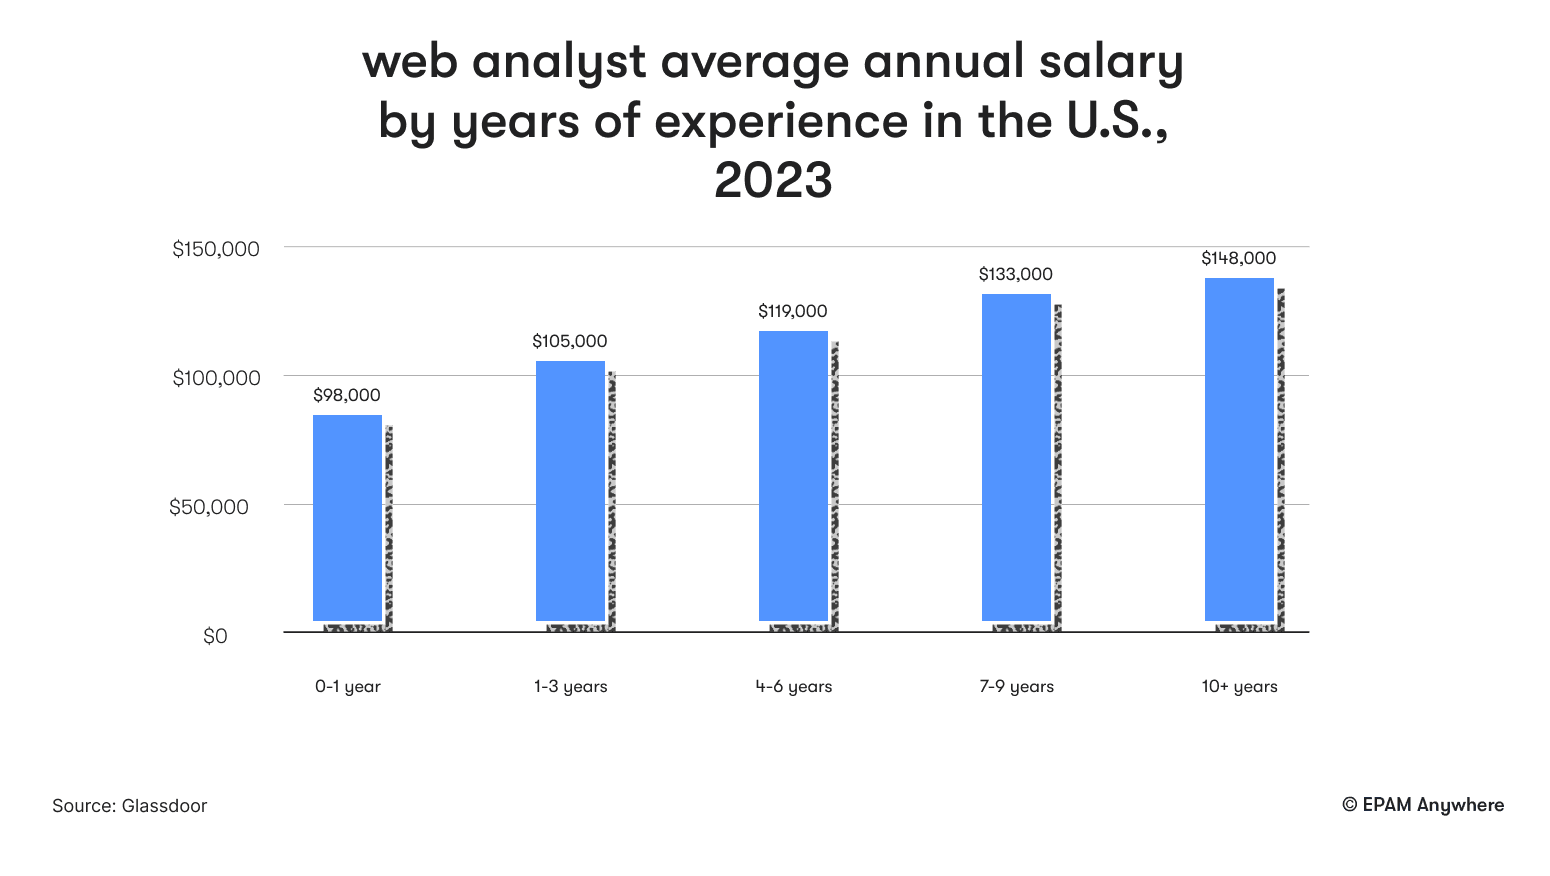 web analyst average annual salary by years of experience in the U.S., 2023